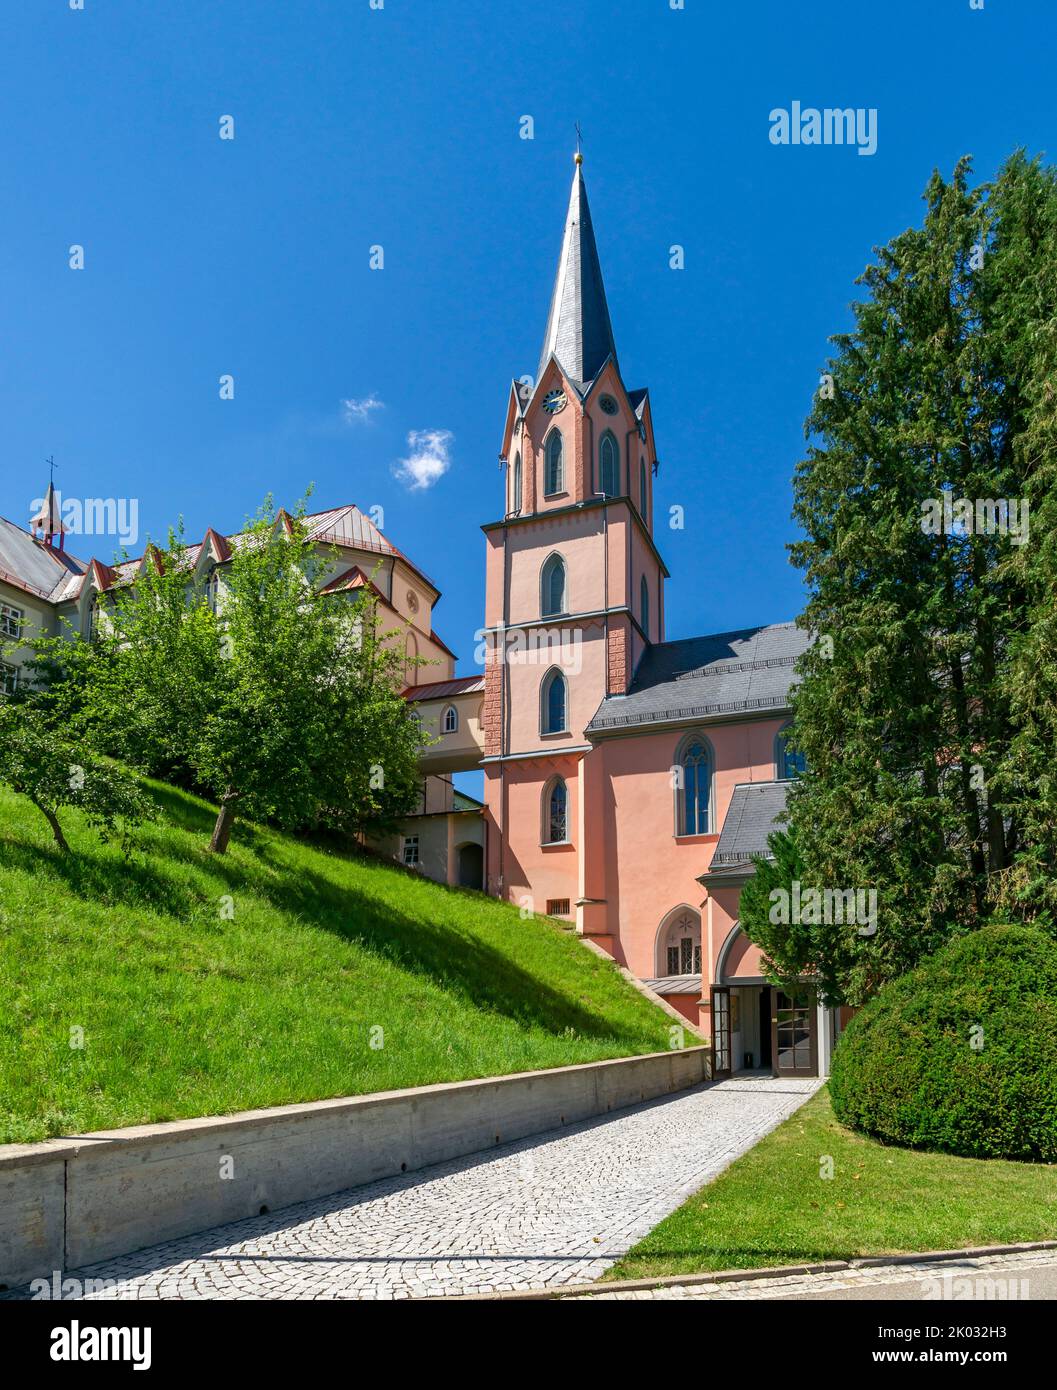 The Bonlanden Convent, founded in 1855, is the motherhouse of the Franciscan Sisters of the Immaculate Conception of Our Lady in Bonlanden, a suburb of the municipality of Berkheim an der Iller in the district of Biberach. Stock Photo